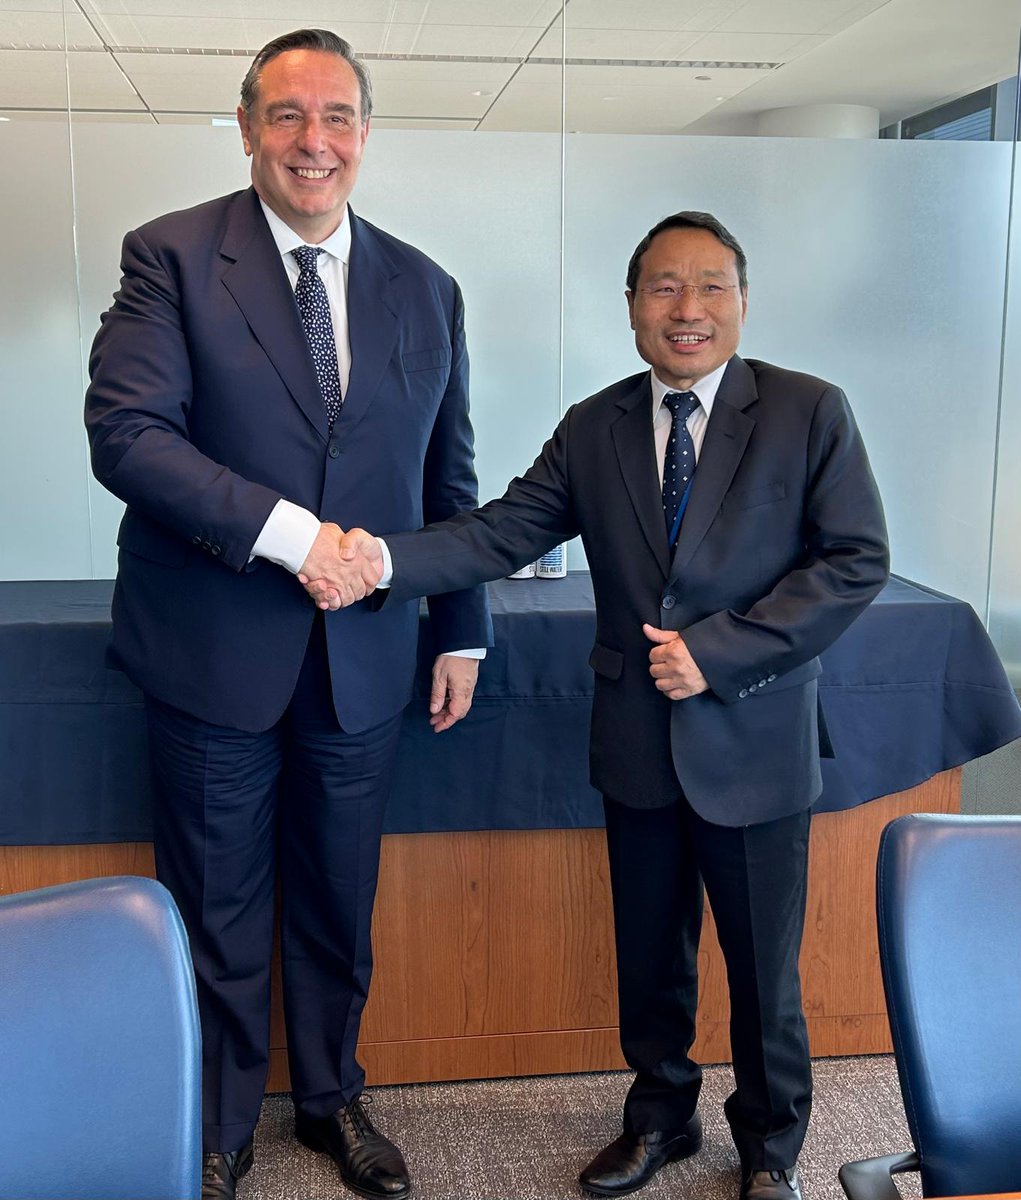 Nepal has tremendous prospect to pivot into a green economy. A good discussion with Nepal FM @BarshamanPun1 & the Nepal delegation at the #WBGMeetings on ways @IFC_org can support the country in building a robust private sector. 🏗️🌍🤝